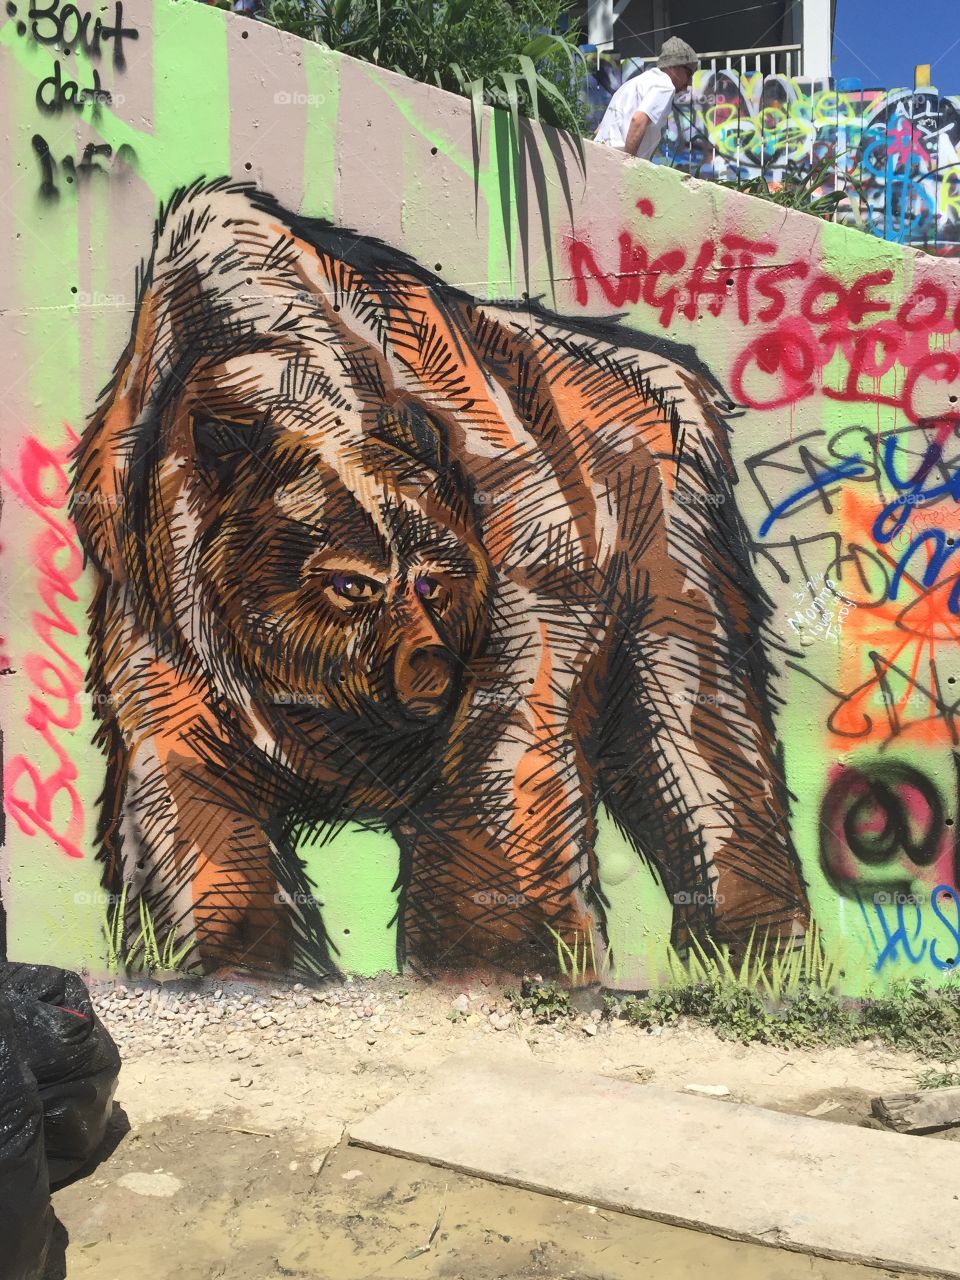 The Grizzly - Austin, TX